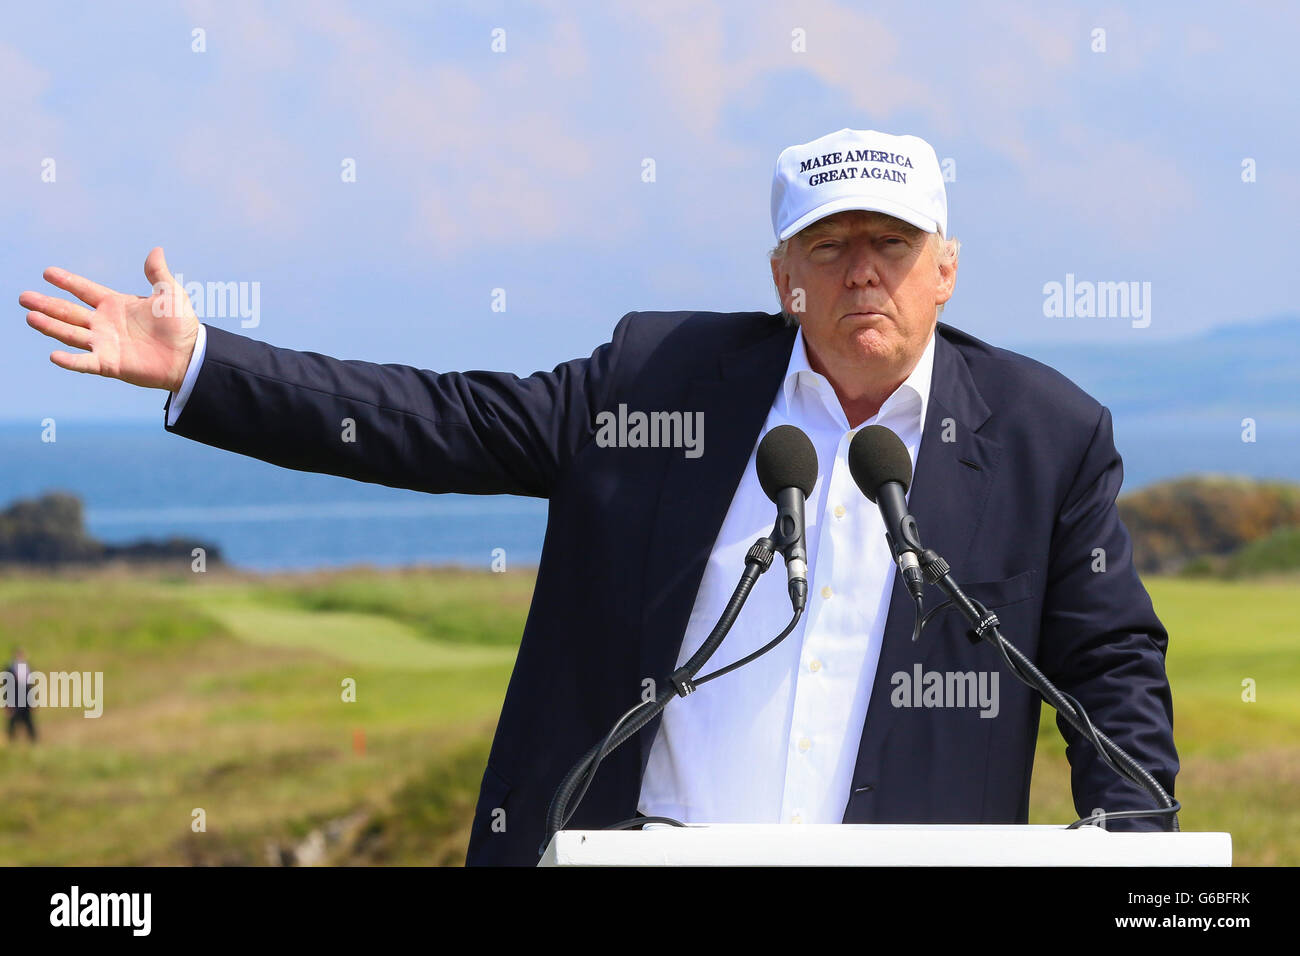 Donald Trump photographed at the opening of Ailsa Golf course, Trump Turnberry, Ayrshire, Scotland Stock Photo